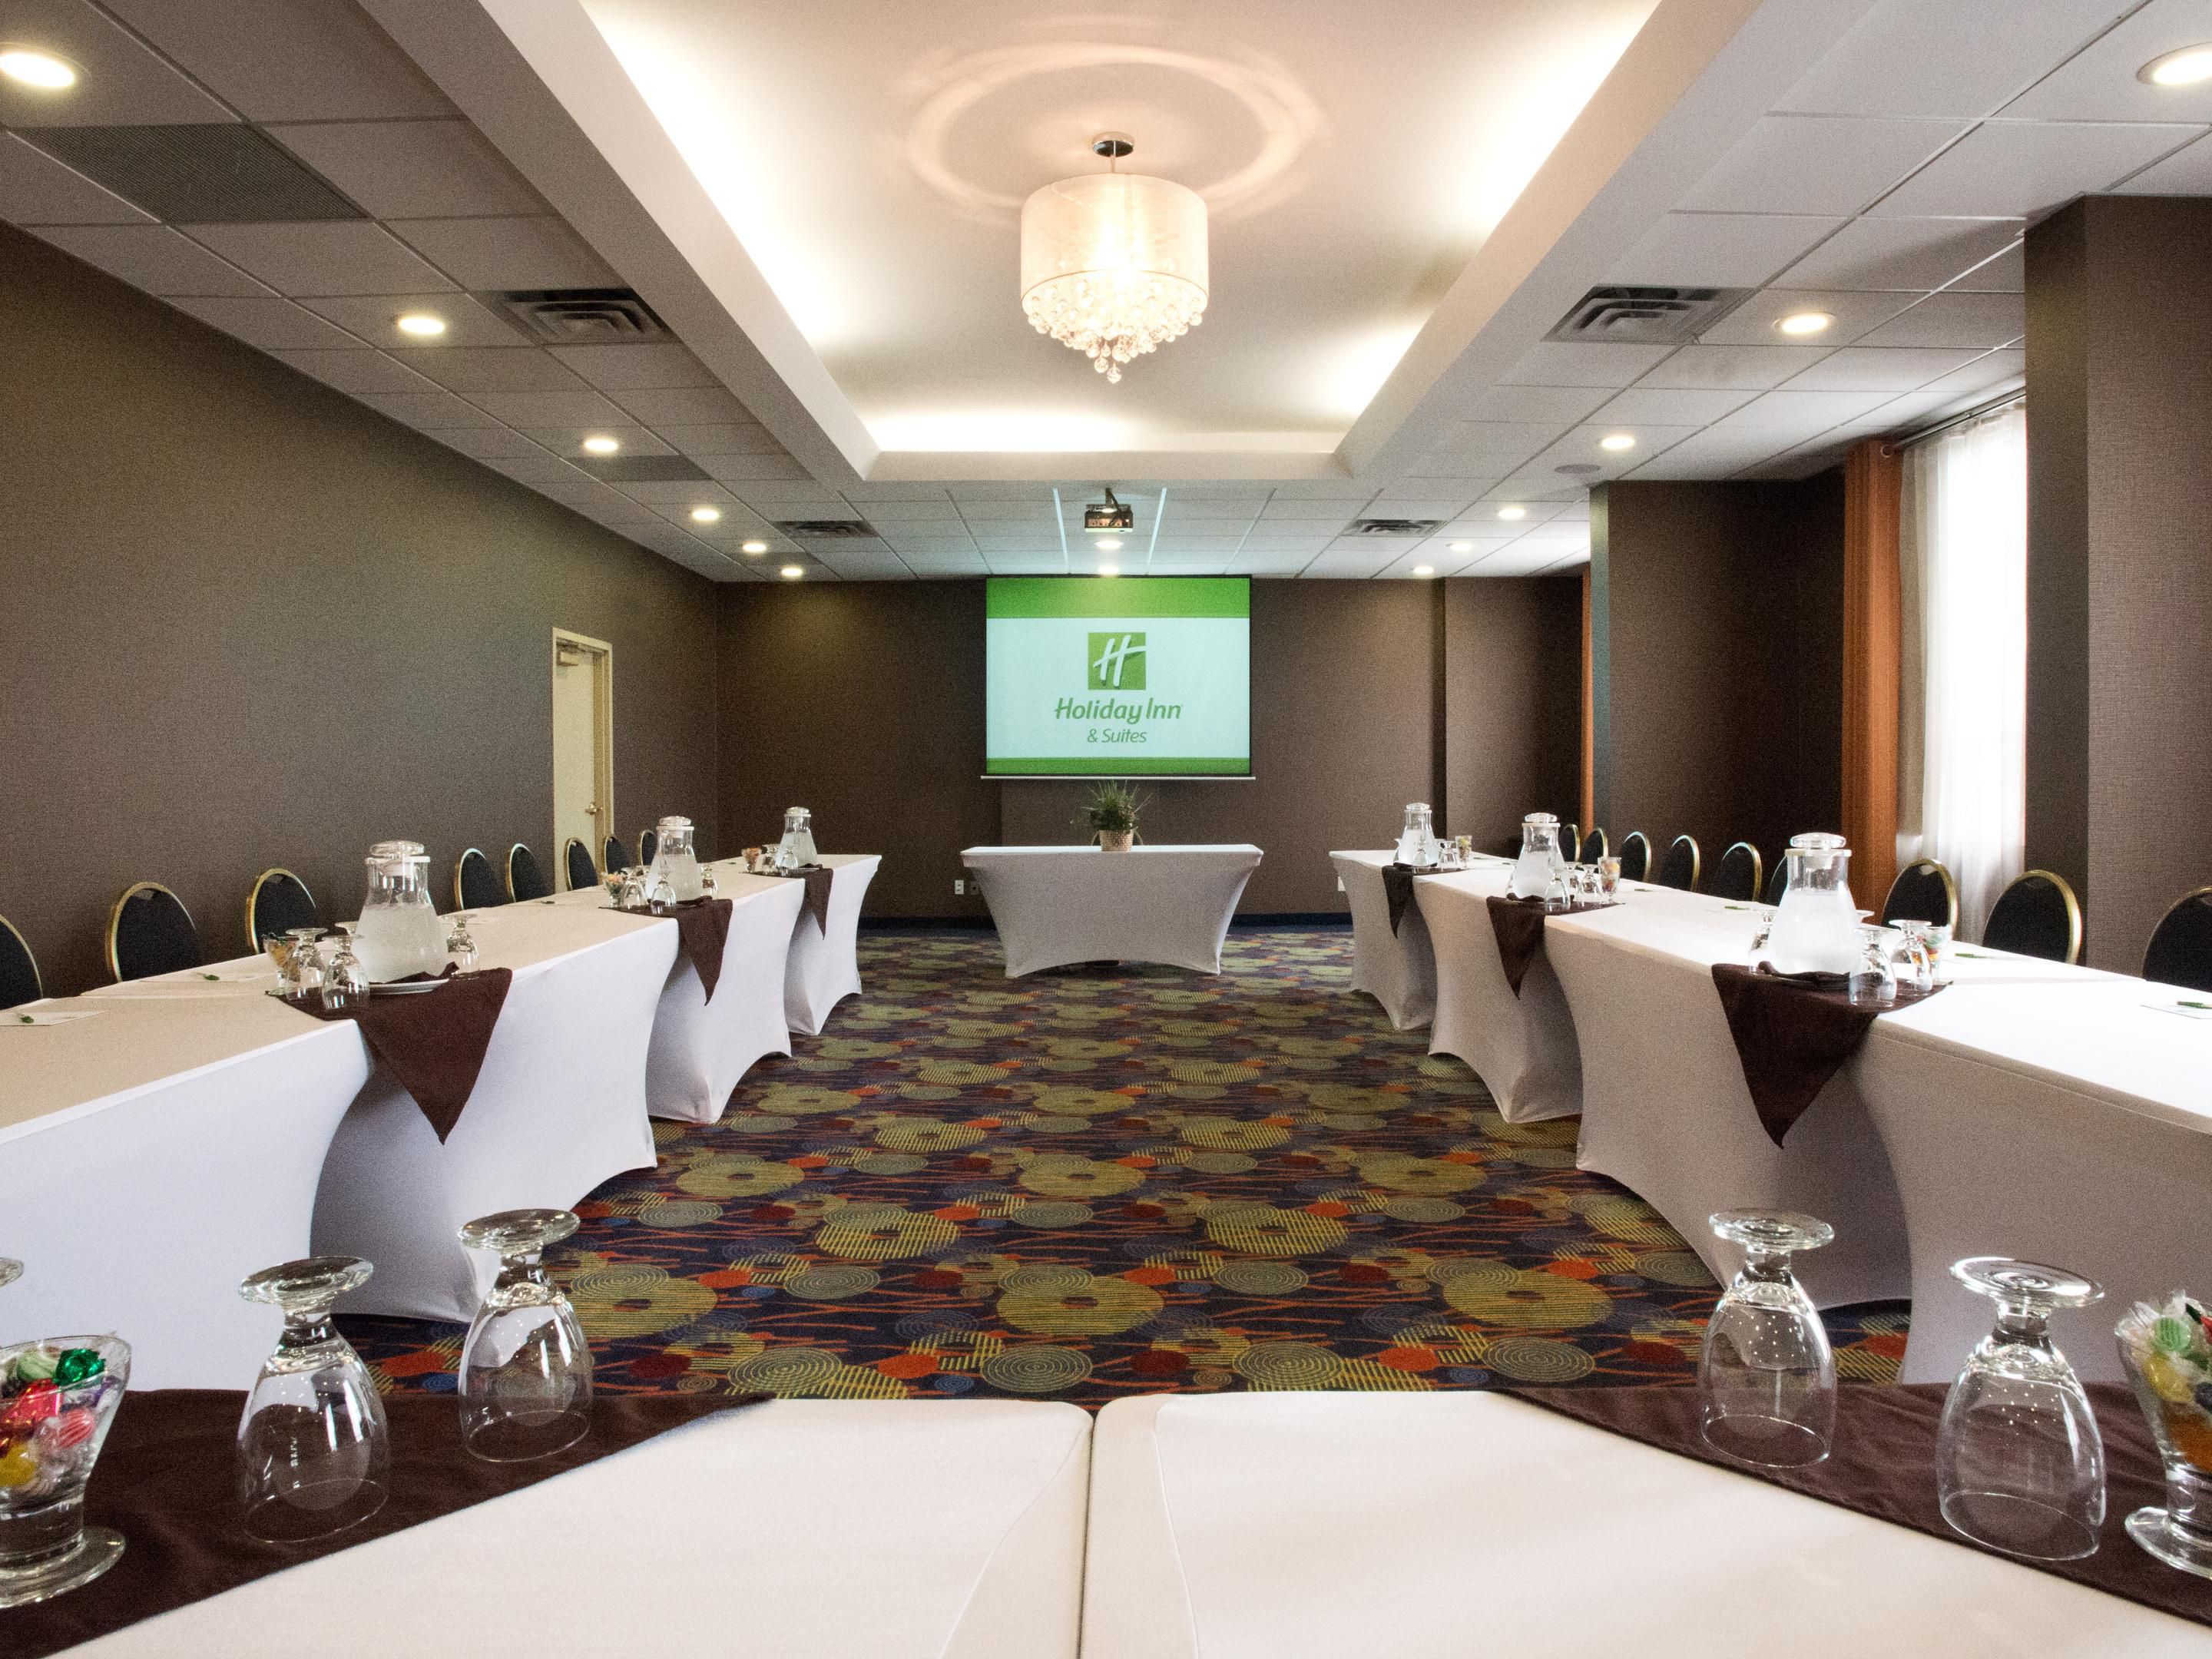 We're ready to welcome you for your next meeting or event. IHG Meet with Confidence supports in-person and virtual attendees by delivering responsible and creative event solutions. From enhanced cleaning measures to zero cancellation, 5% rebate and IHG Business Rewards - we're ready for you.